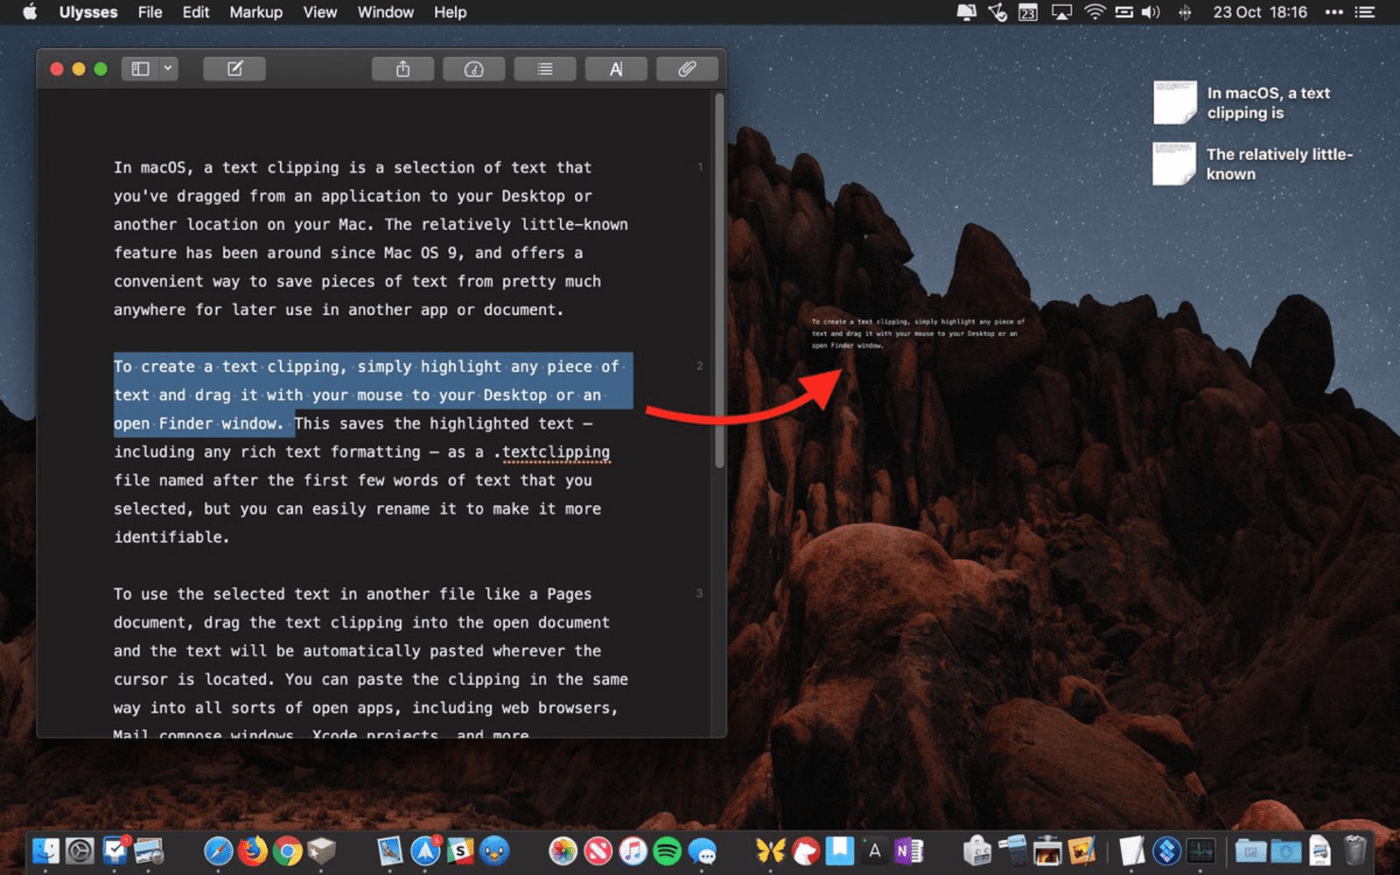 Highlighting text to clip and save it in your Macbook